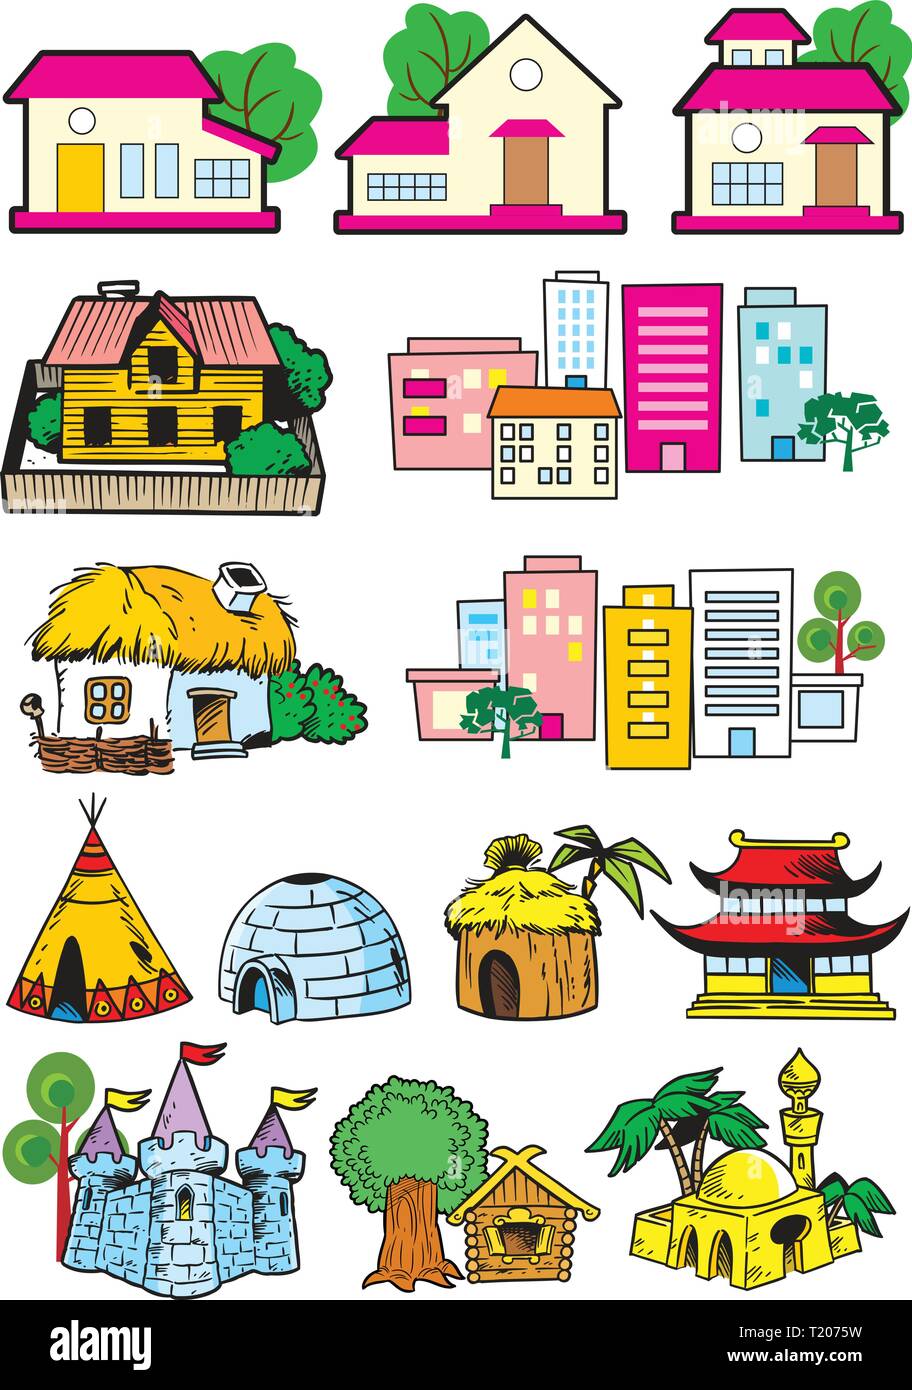 The illustration shows the houses in which people live.Each house is on a separate layer. Stock Vector